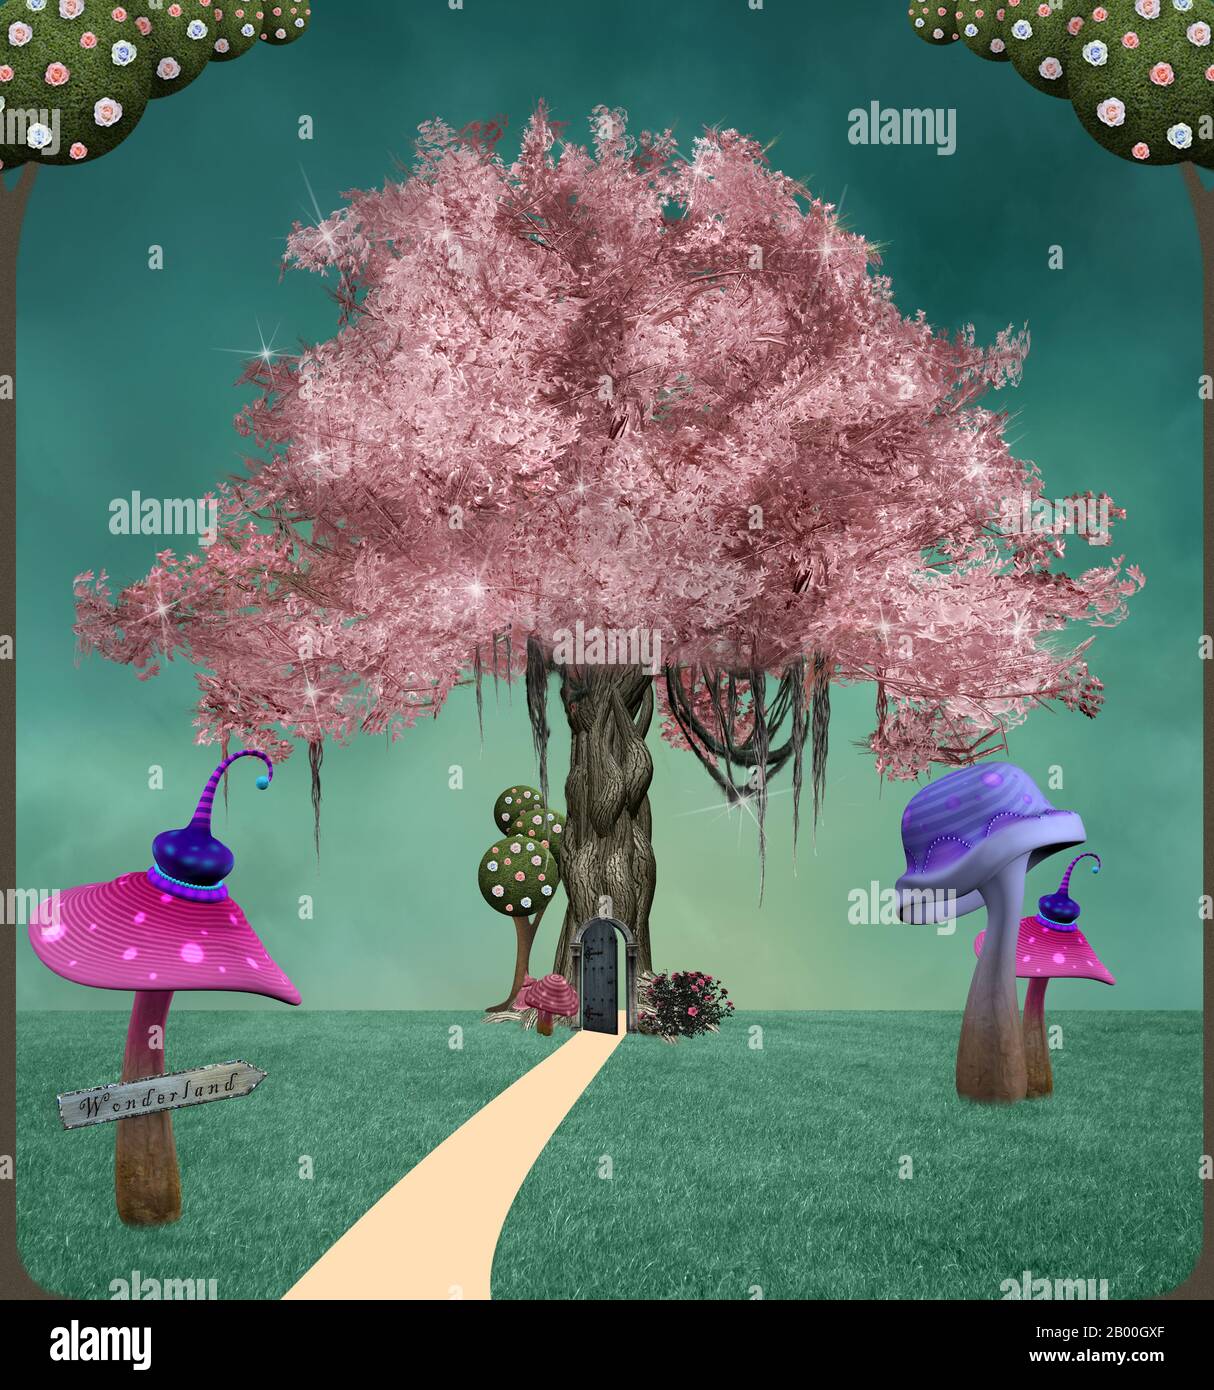 Pink tree in a fantasy garden with colorful mushrooms Stock Photo